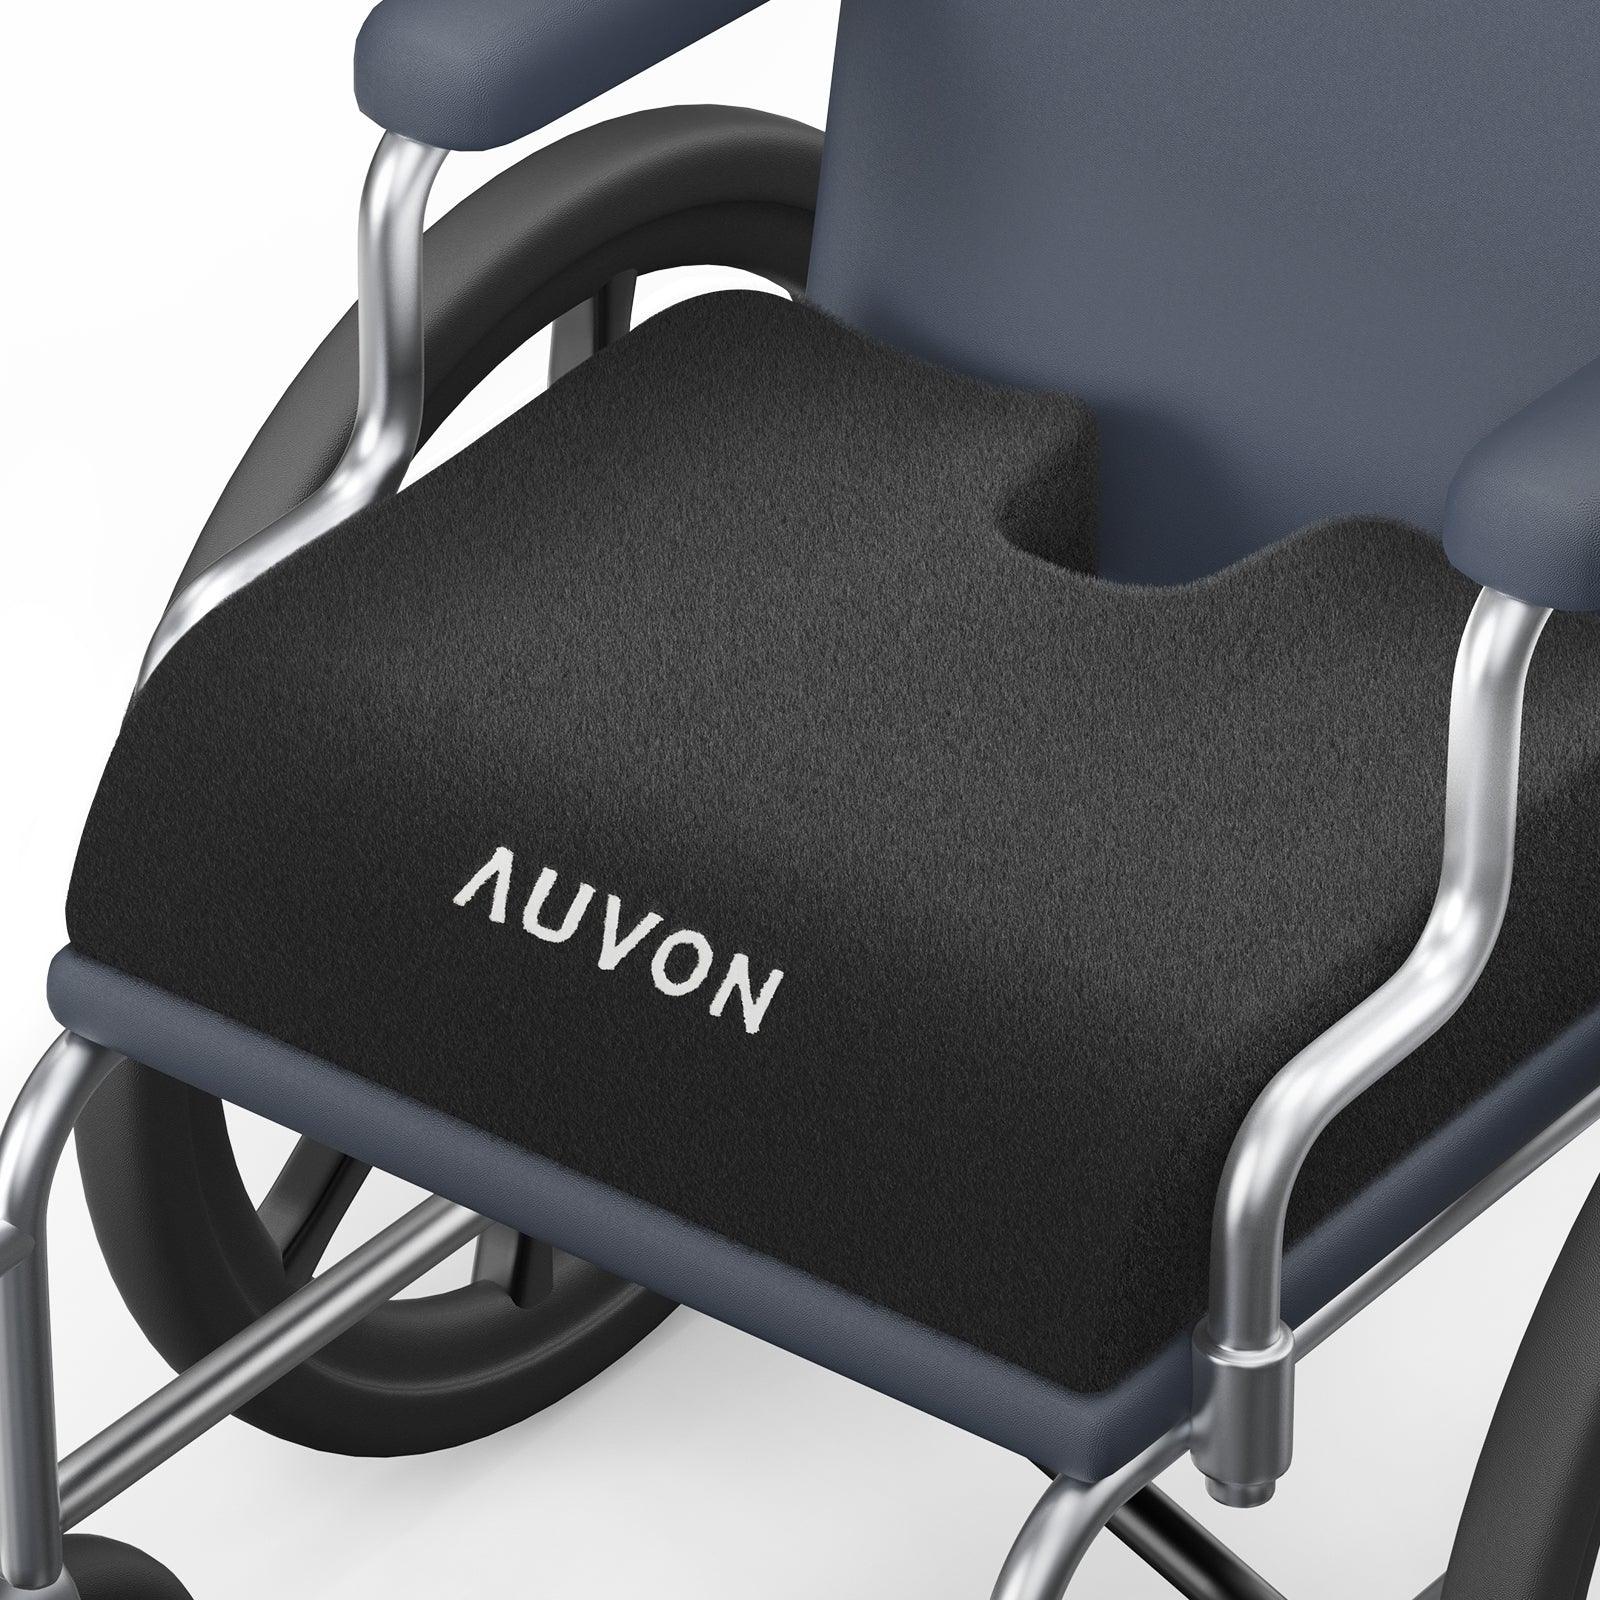 http://auvonhealth.com/cdn/shop/files/auvon-wheelchair-seat-cushions-18-x16-x3-for-sciatica-back-coccyx-pressure-sore-and-ulcer-pain-relief-memory-foam-pressure-relief-cushion-with-removable-strap-breathable-and-waterproo.jpg?v=1686019874